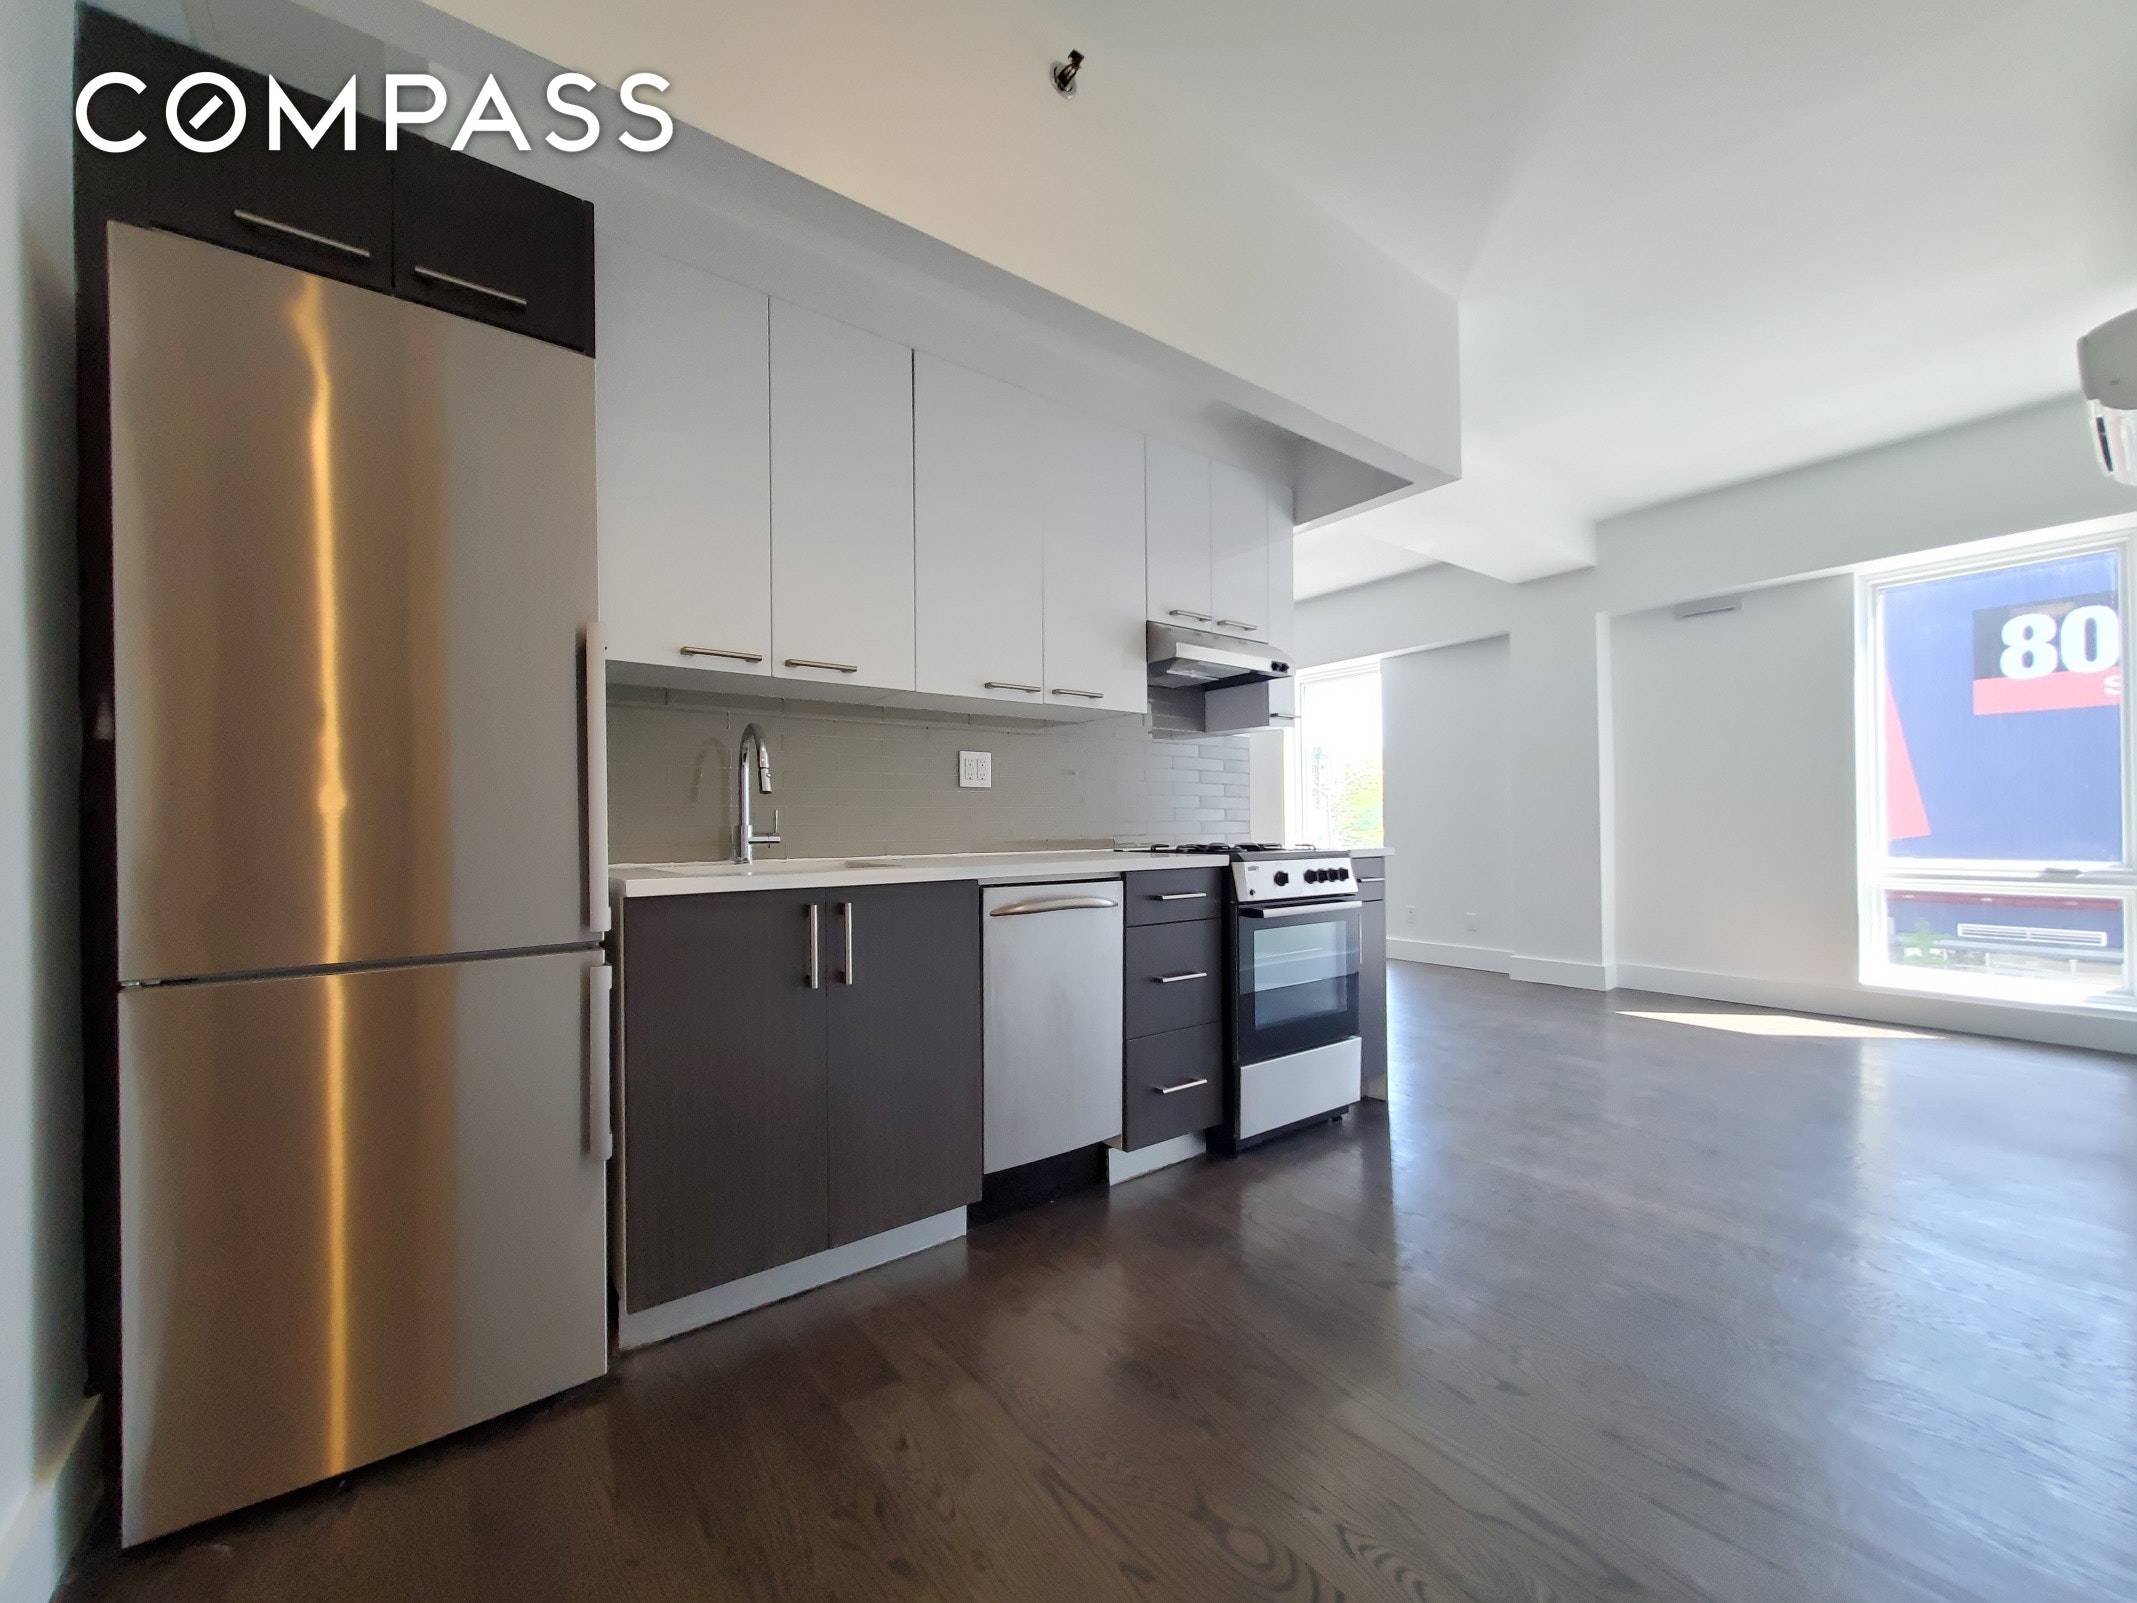 UPSCALE AND INTIMATE Ideally located between Prospect Heights and Clinton Hill, 863 Atlantic is close to Pratt Institute, Brooklyn Museum, Barclays Center and much, much more !